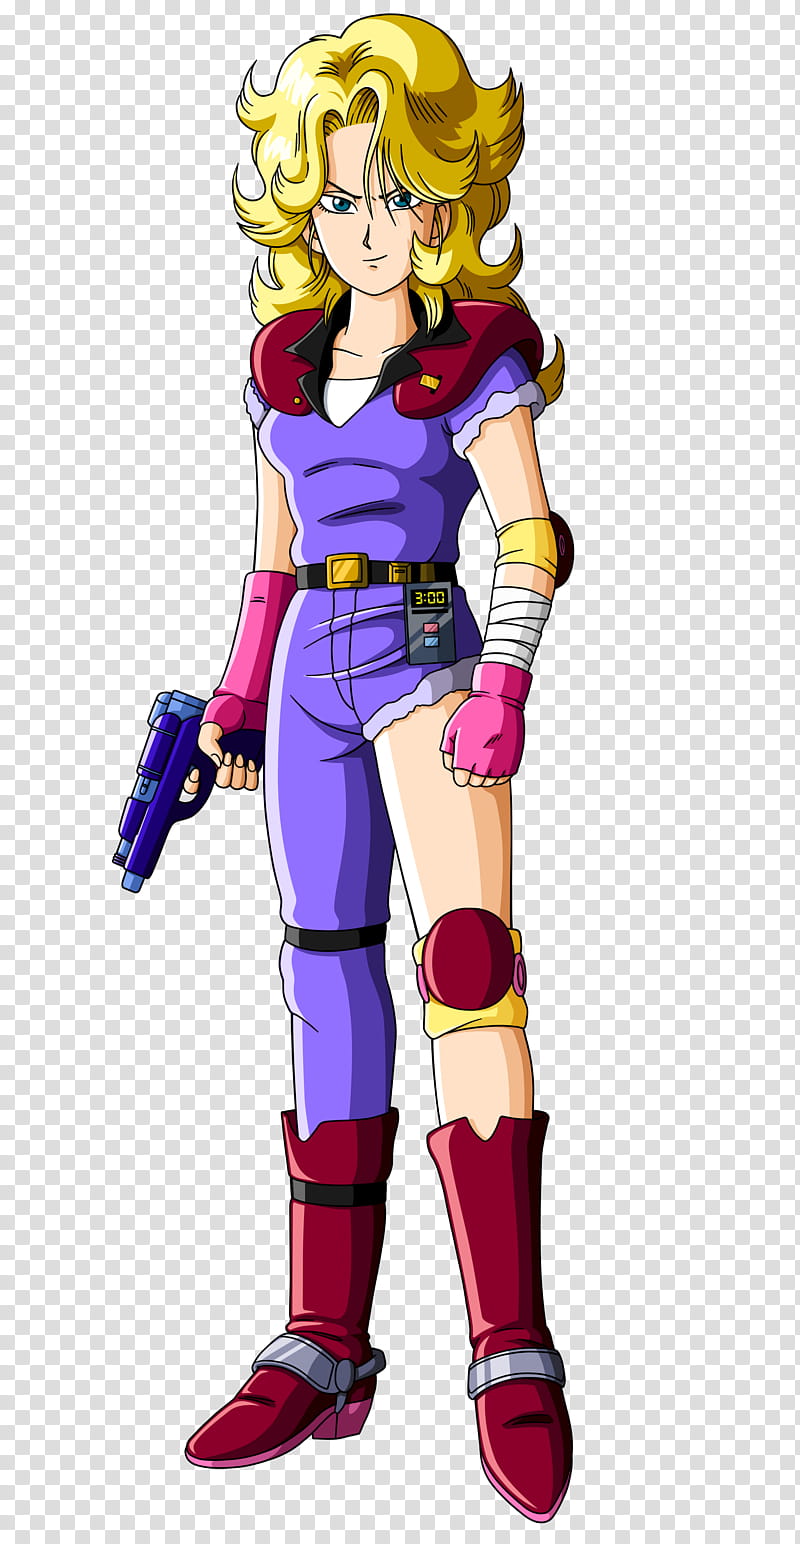 New Renders Characters, girl anime character in purple and red suit ...